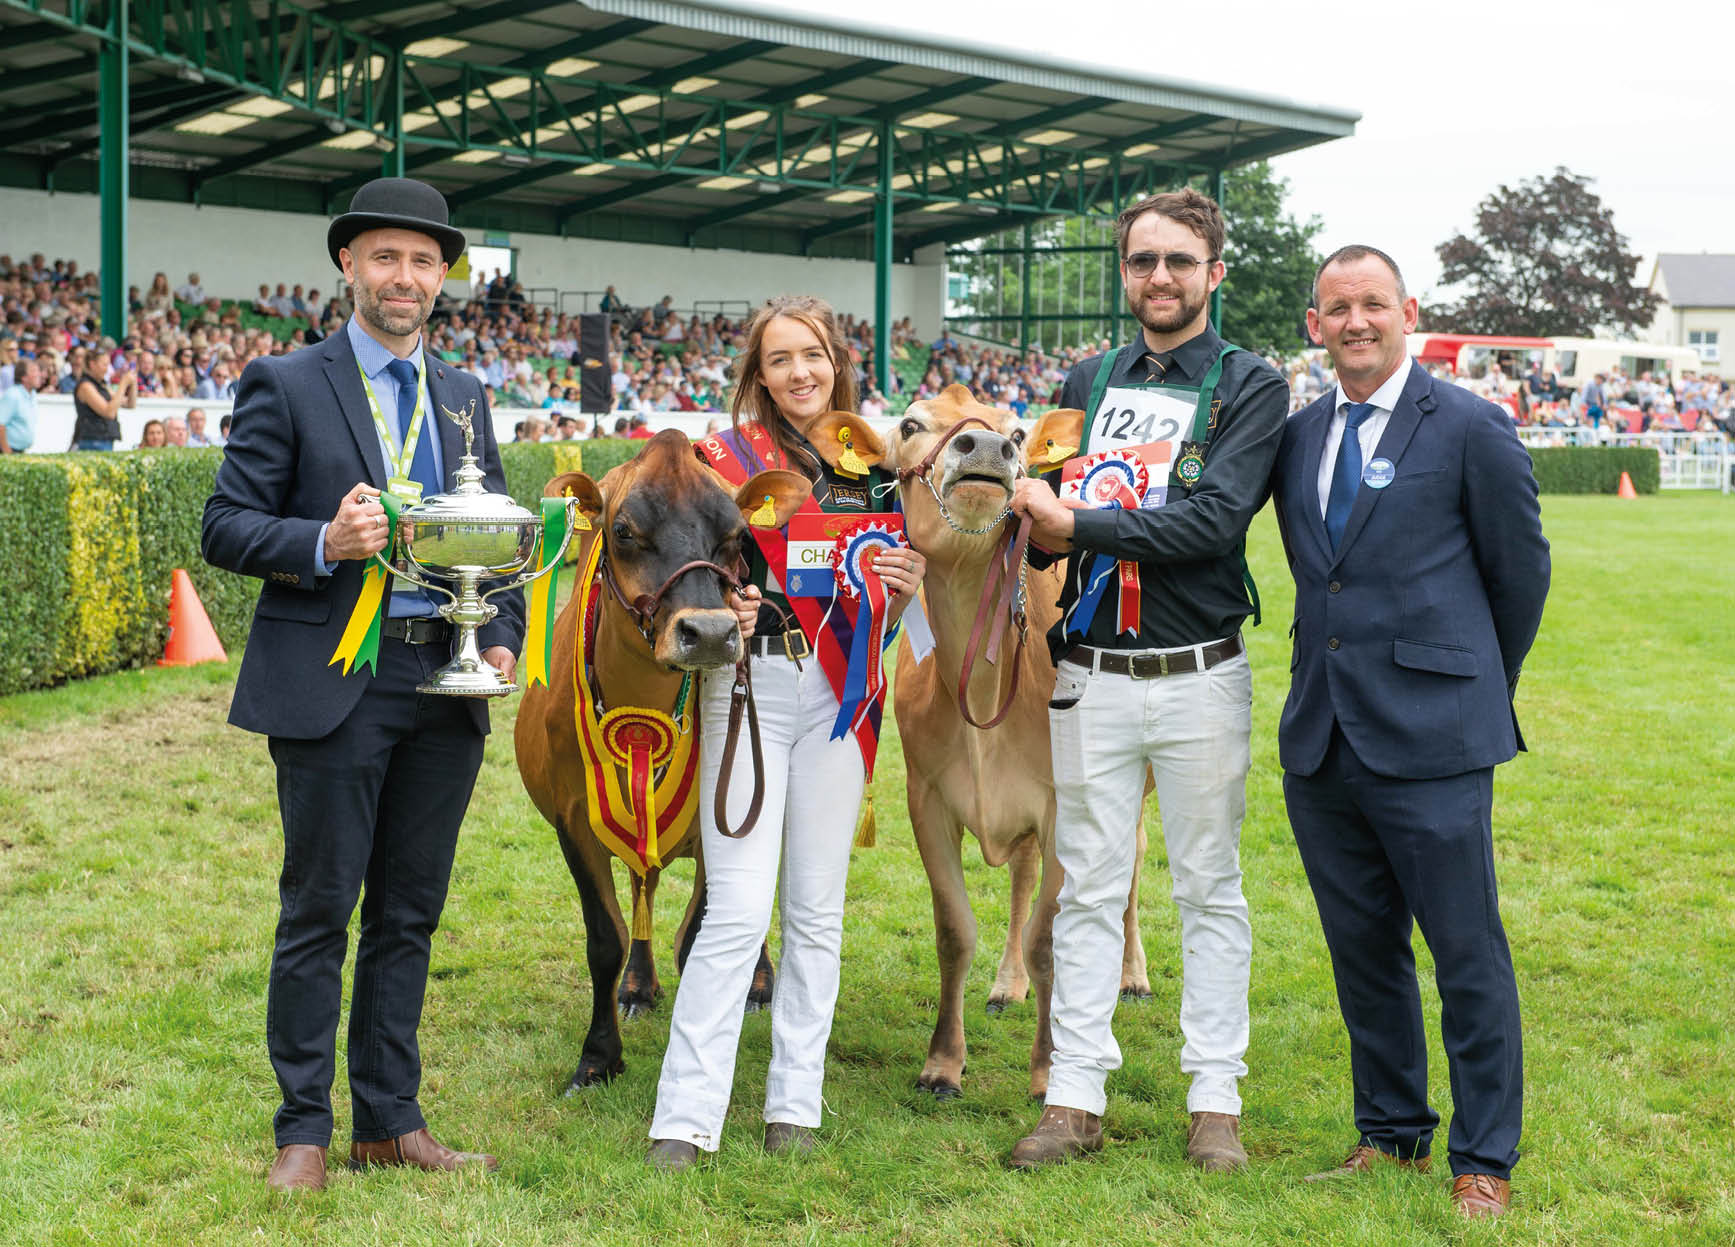 2019_Blythwood Pairs Dairy champion - Jerseys. L-r - Gavin Thompson from sponsor Asda presenting. Ellie Saxby with Saxowne Precision Cash 89 and Tom Saxby with Thurlstone Topeka Orange from Bawtry, South Yorkshire.  Judge Duncan Hunter (right).  Photography by Richard Walker